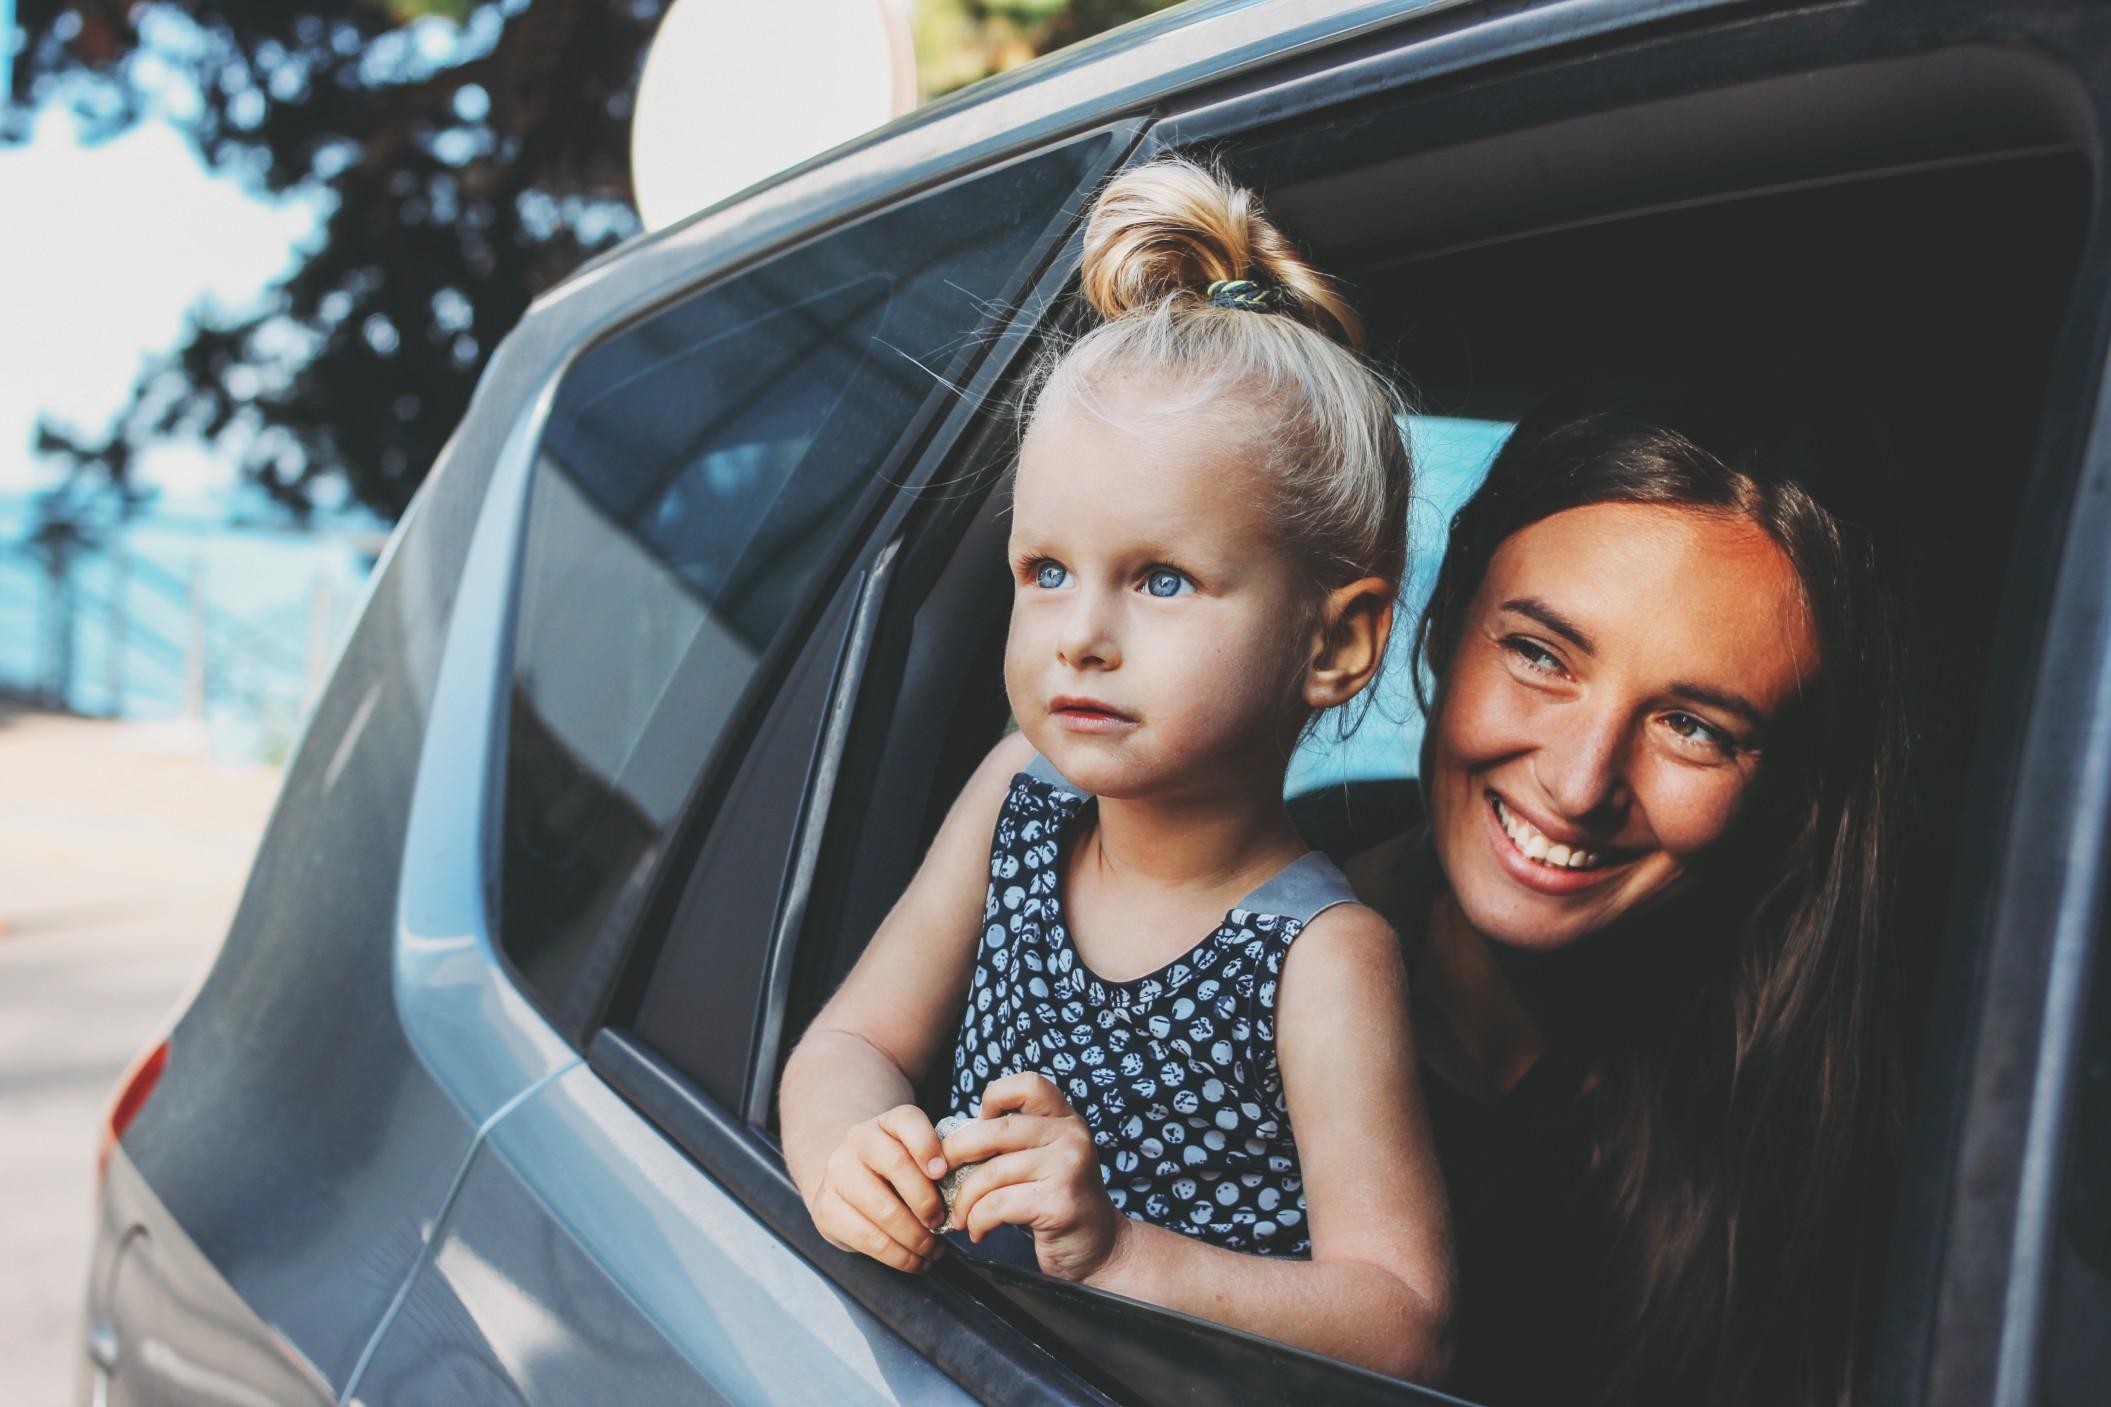 When buying a car for your family, be sure to consider whether the car has family-friendly tech features.